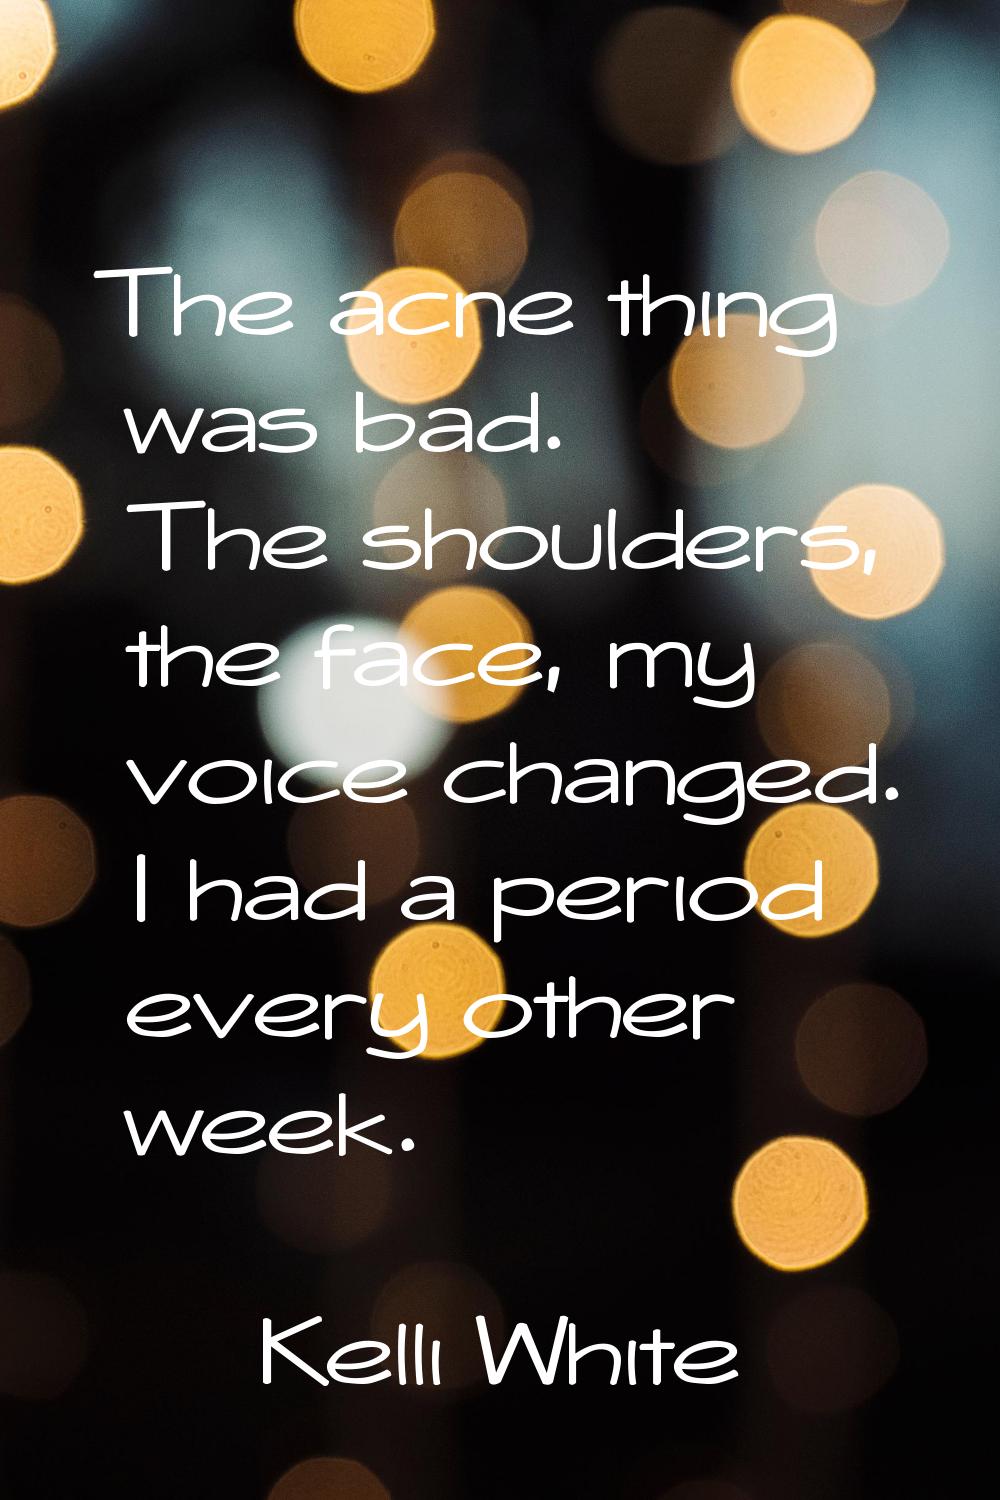 The acne thing was bad. The shoulders, the face, my voice changed. I had a period every other week.